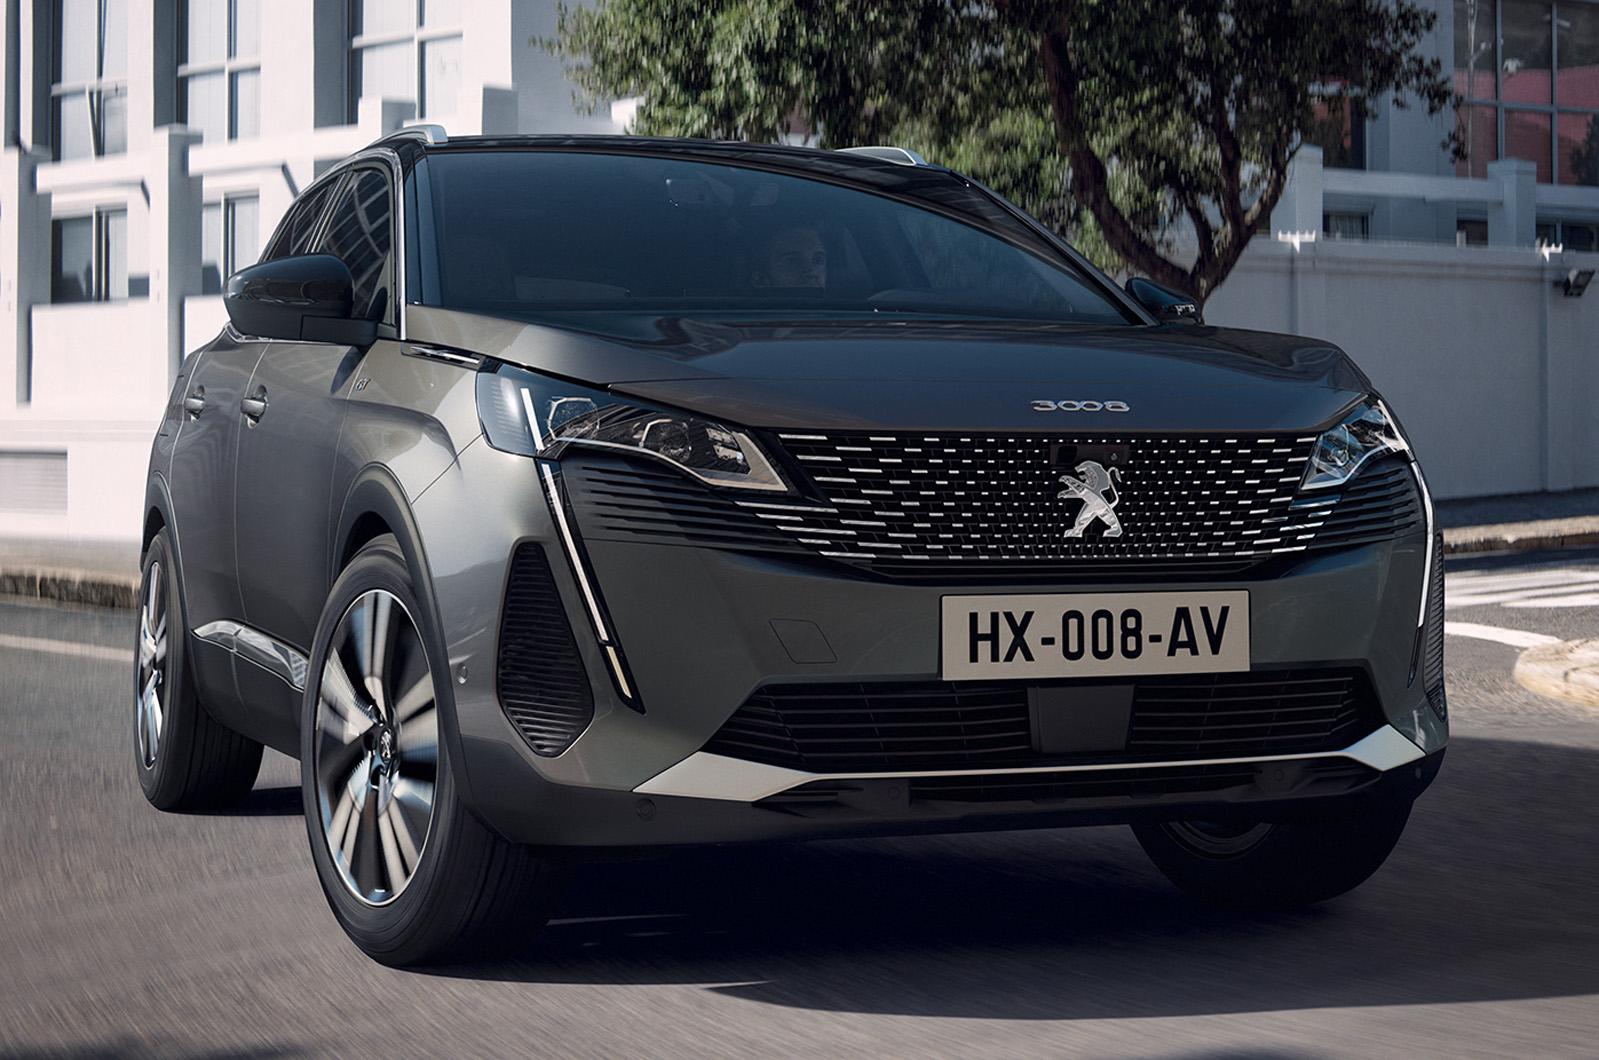 2021 Peugeot 3008 GT family car review – BabyDrive